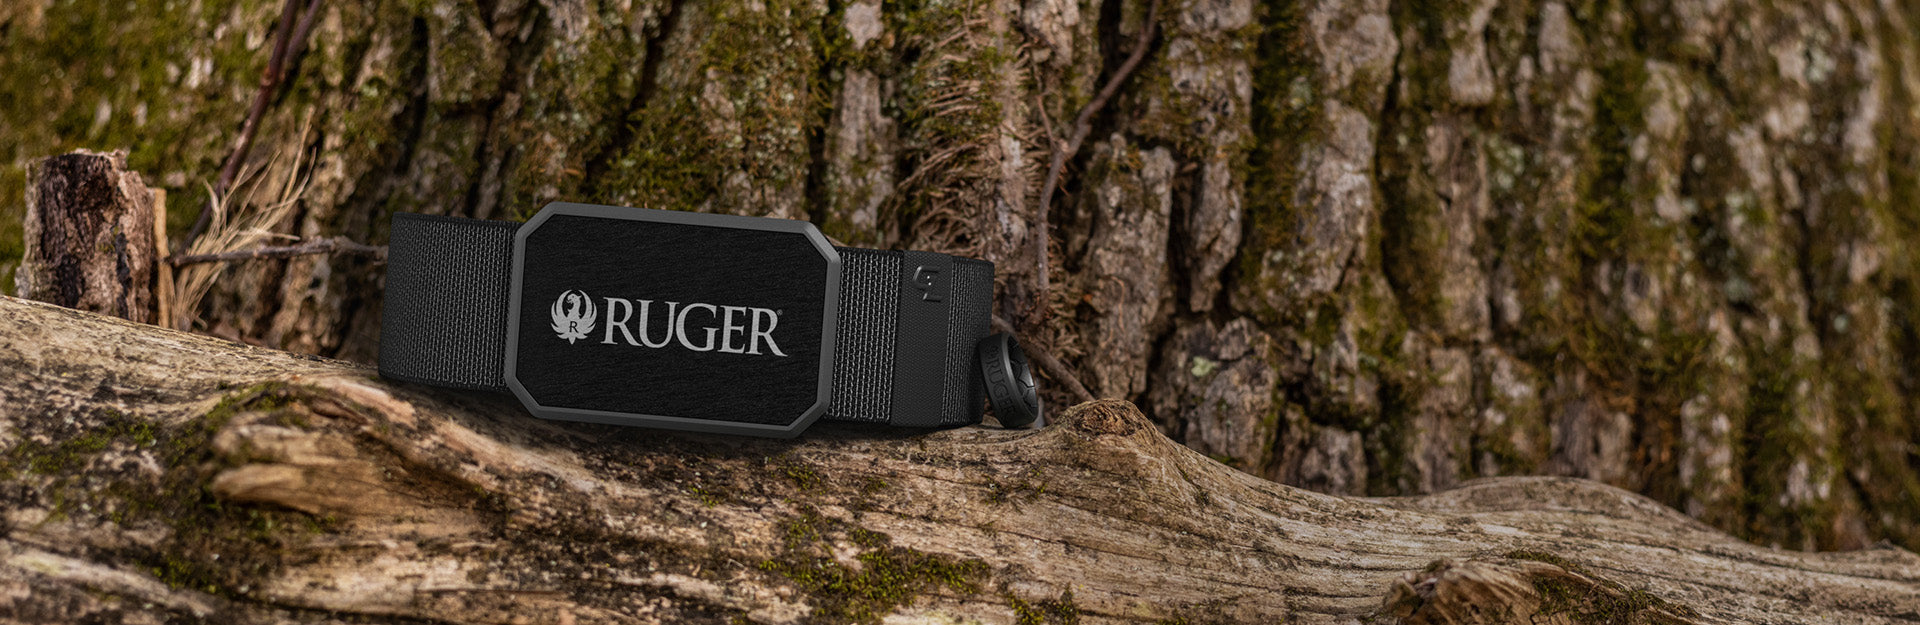 Groove Life belt featuring an engraved Ruger logo